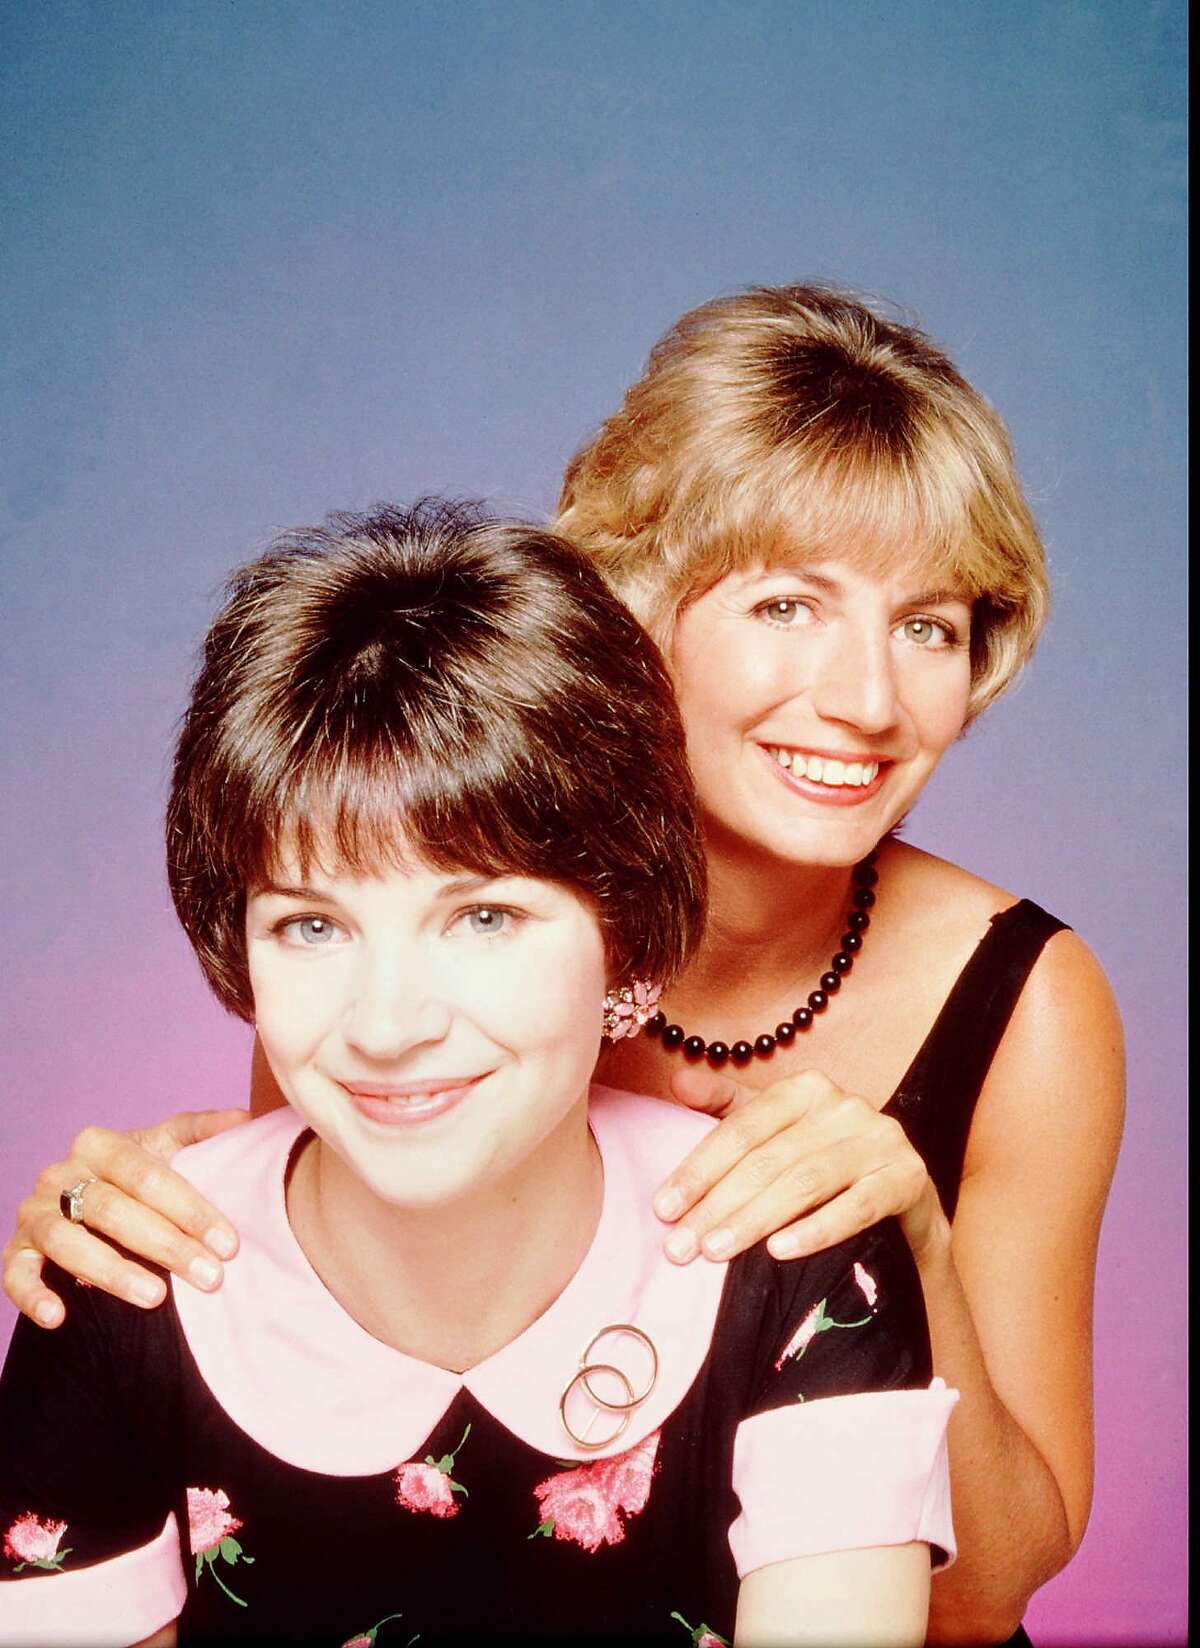 ABC7 (4/11/95)--LAVERNE & SHIRLEY REUNION-- Penny Marshall and Cindy Williams will relive the best moments from their classic comedy series, LAVERNE & SHIRLEY, on a one hour special airing MONDAY, MAY 22 (8-9 pm, ET) on the ABC Television Network. HISTORIC FILE PHOTO. HOUCHRON CAPTION (09/05/2001): Penny Marshall, right, and Cindy Williams join other "Laverne and Shirley" cast members for a fond look back at the show on "Biography" on A&E.